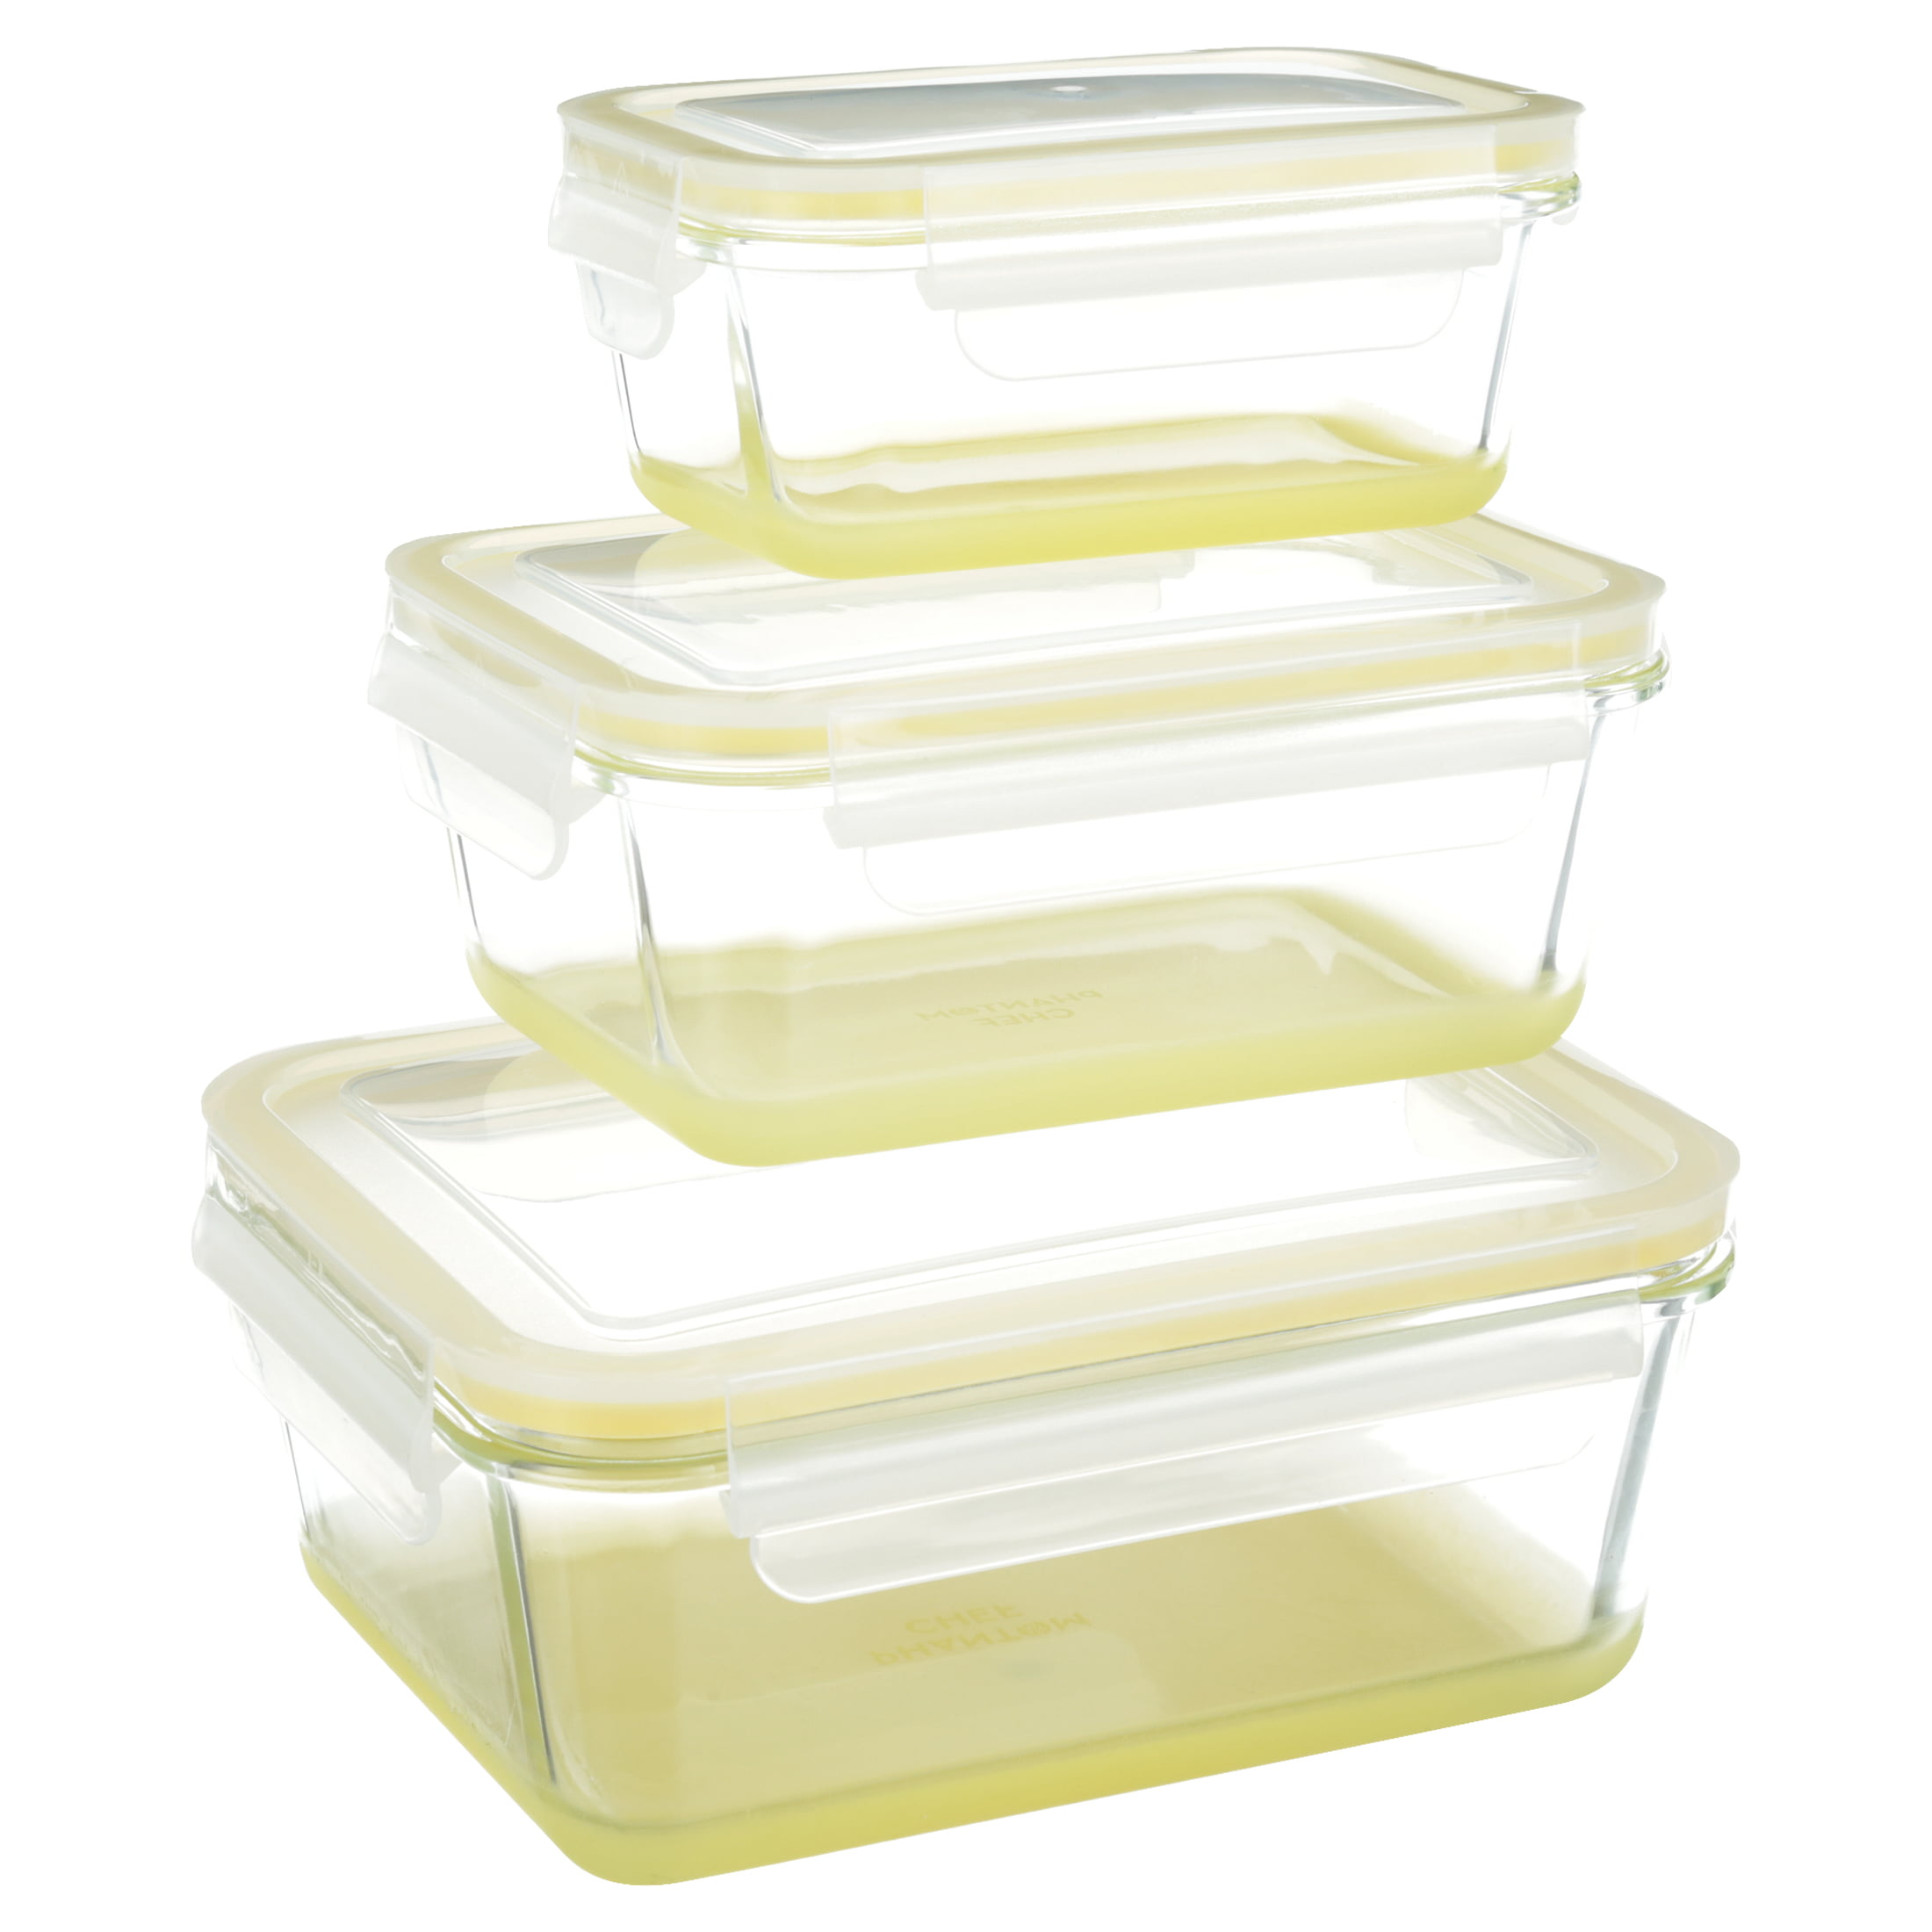 CLOVER CLEAR XL 3 COMPARTMENT HINGED CONTAINER - US Foods CHEF'STORE